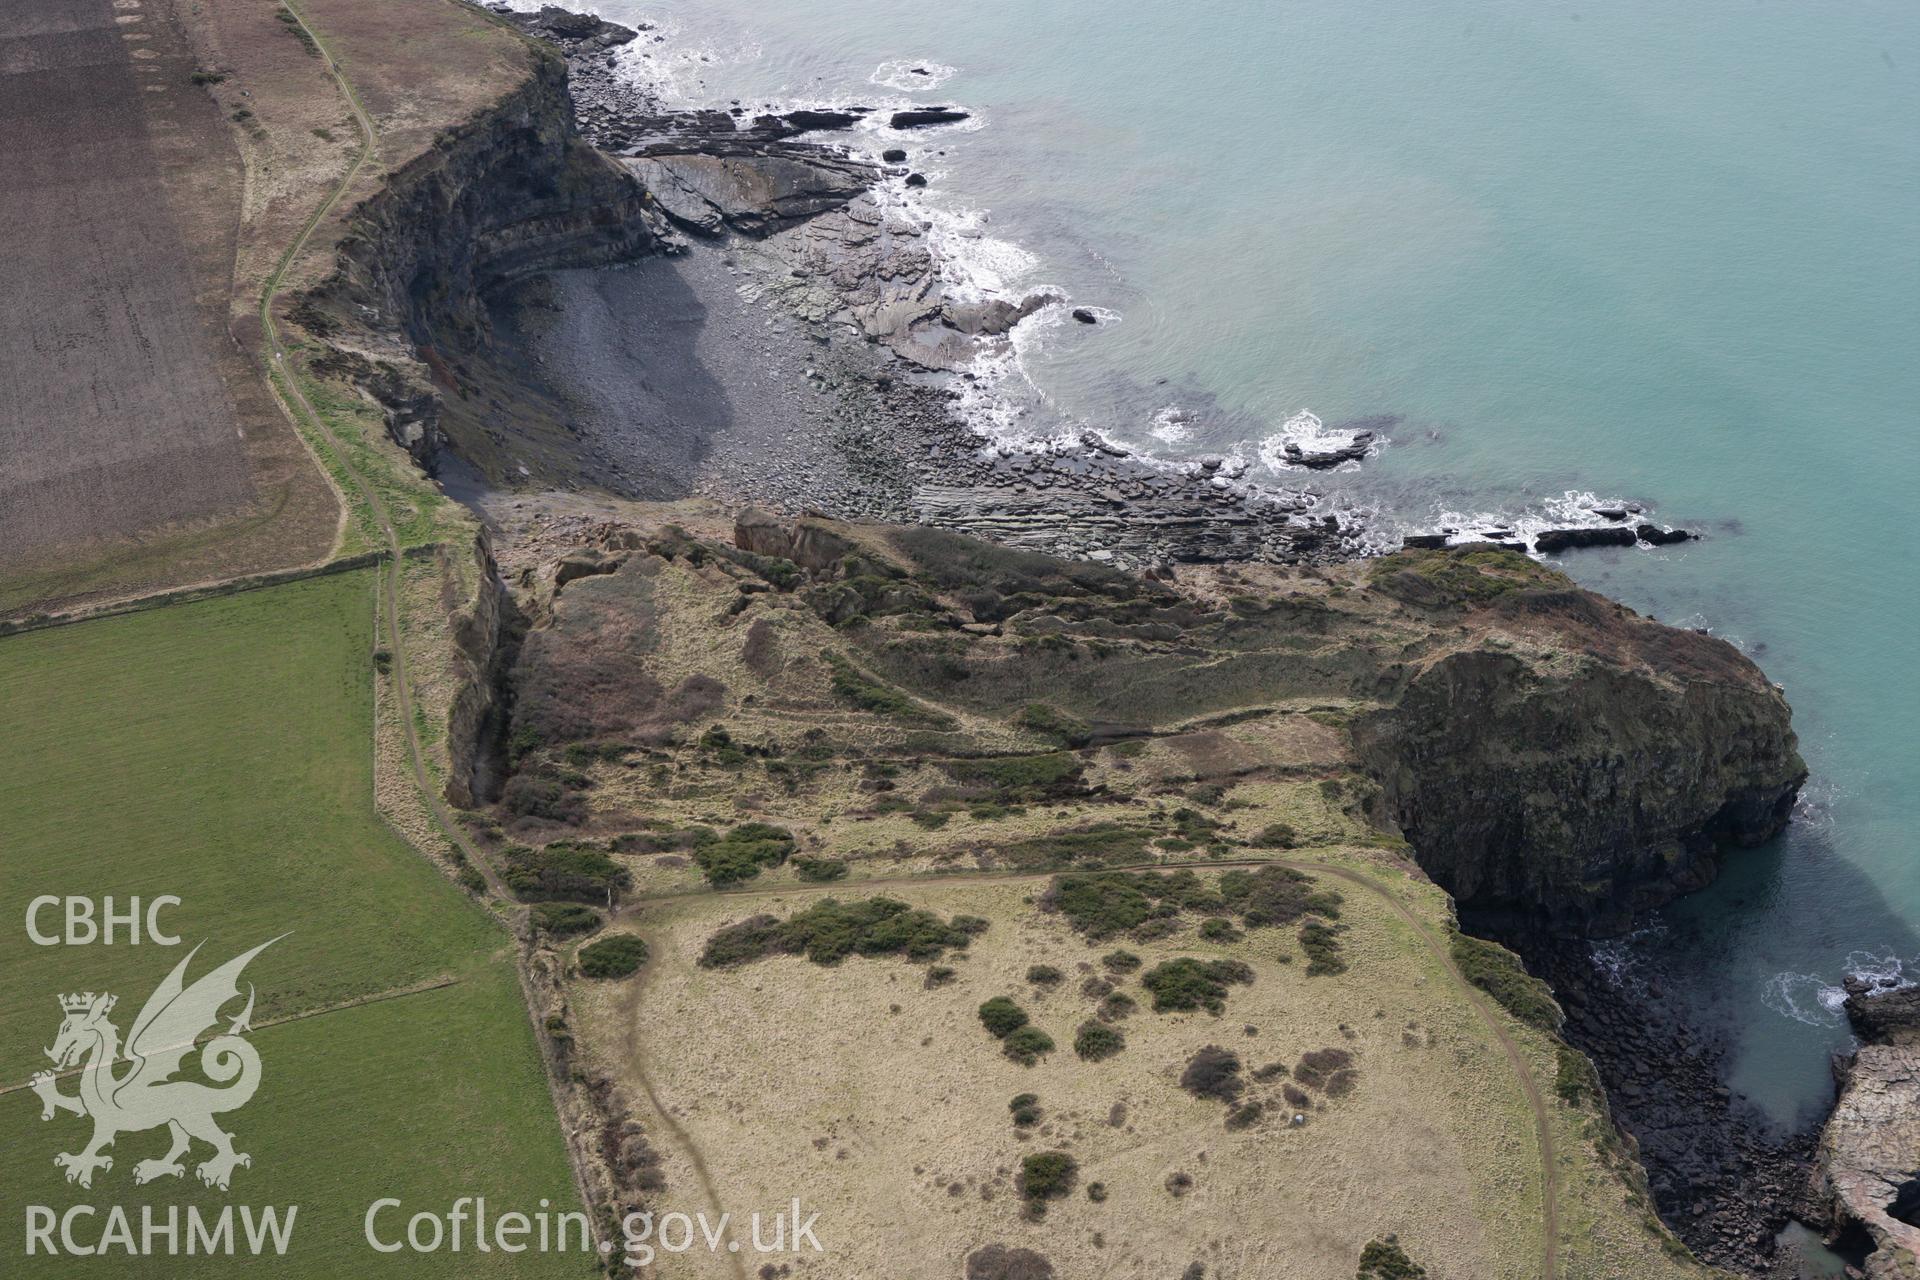 RCAHMW colour oblique aerial photograph of Black Point Rath. Taken on 02 March 2010 by Toby Driver